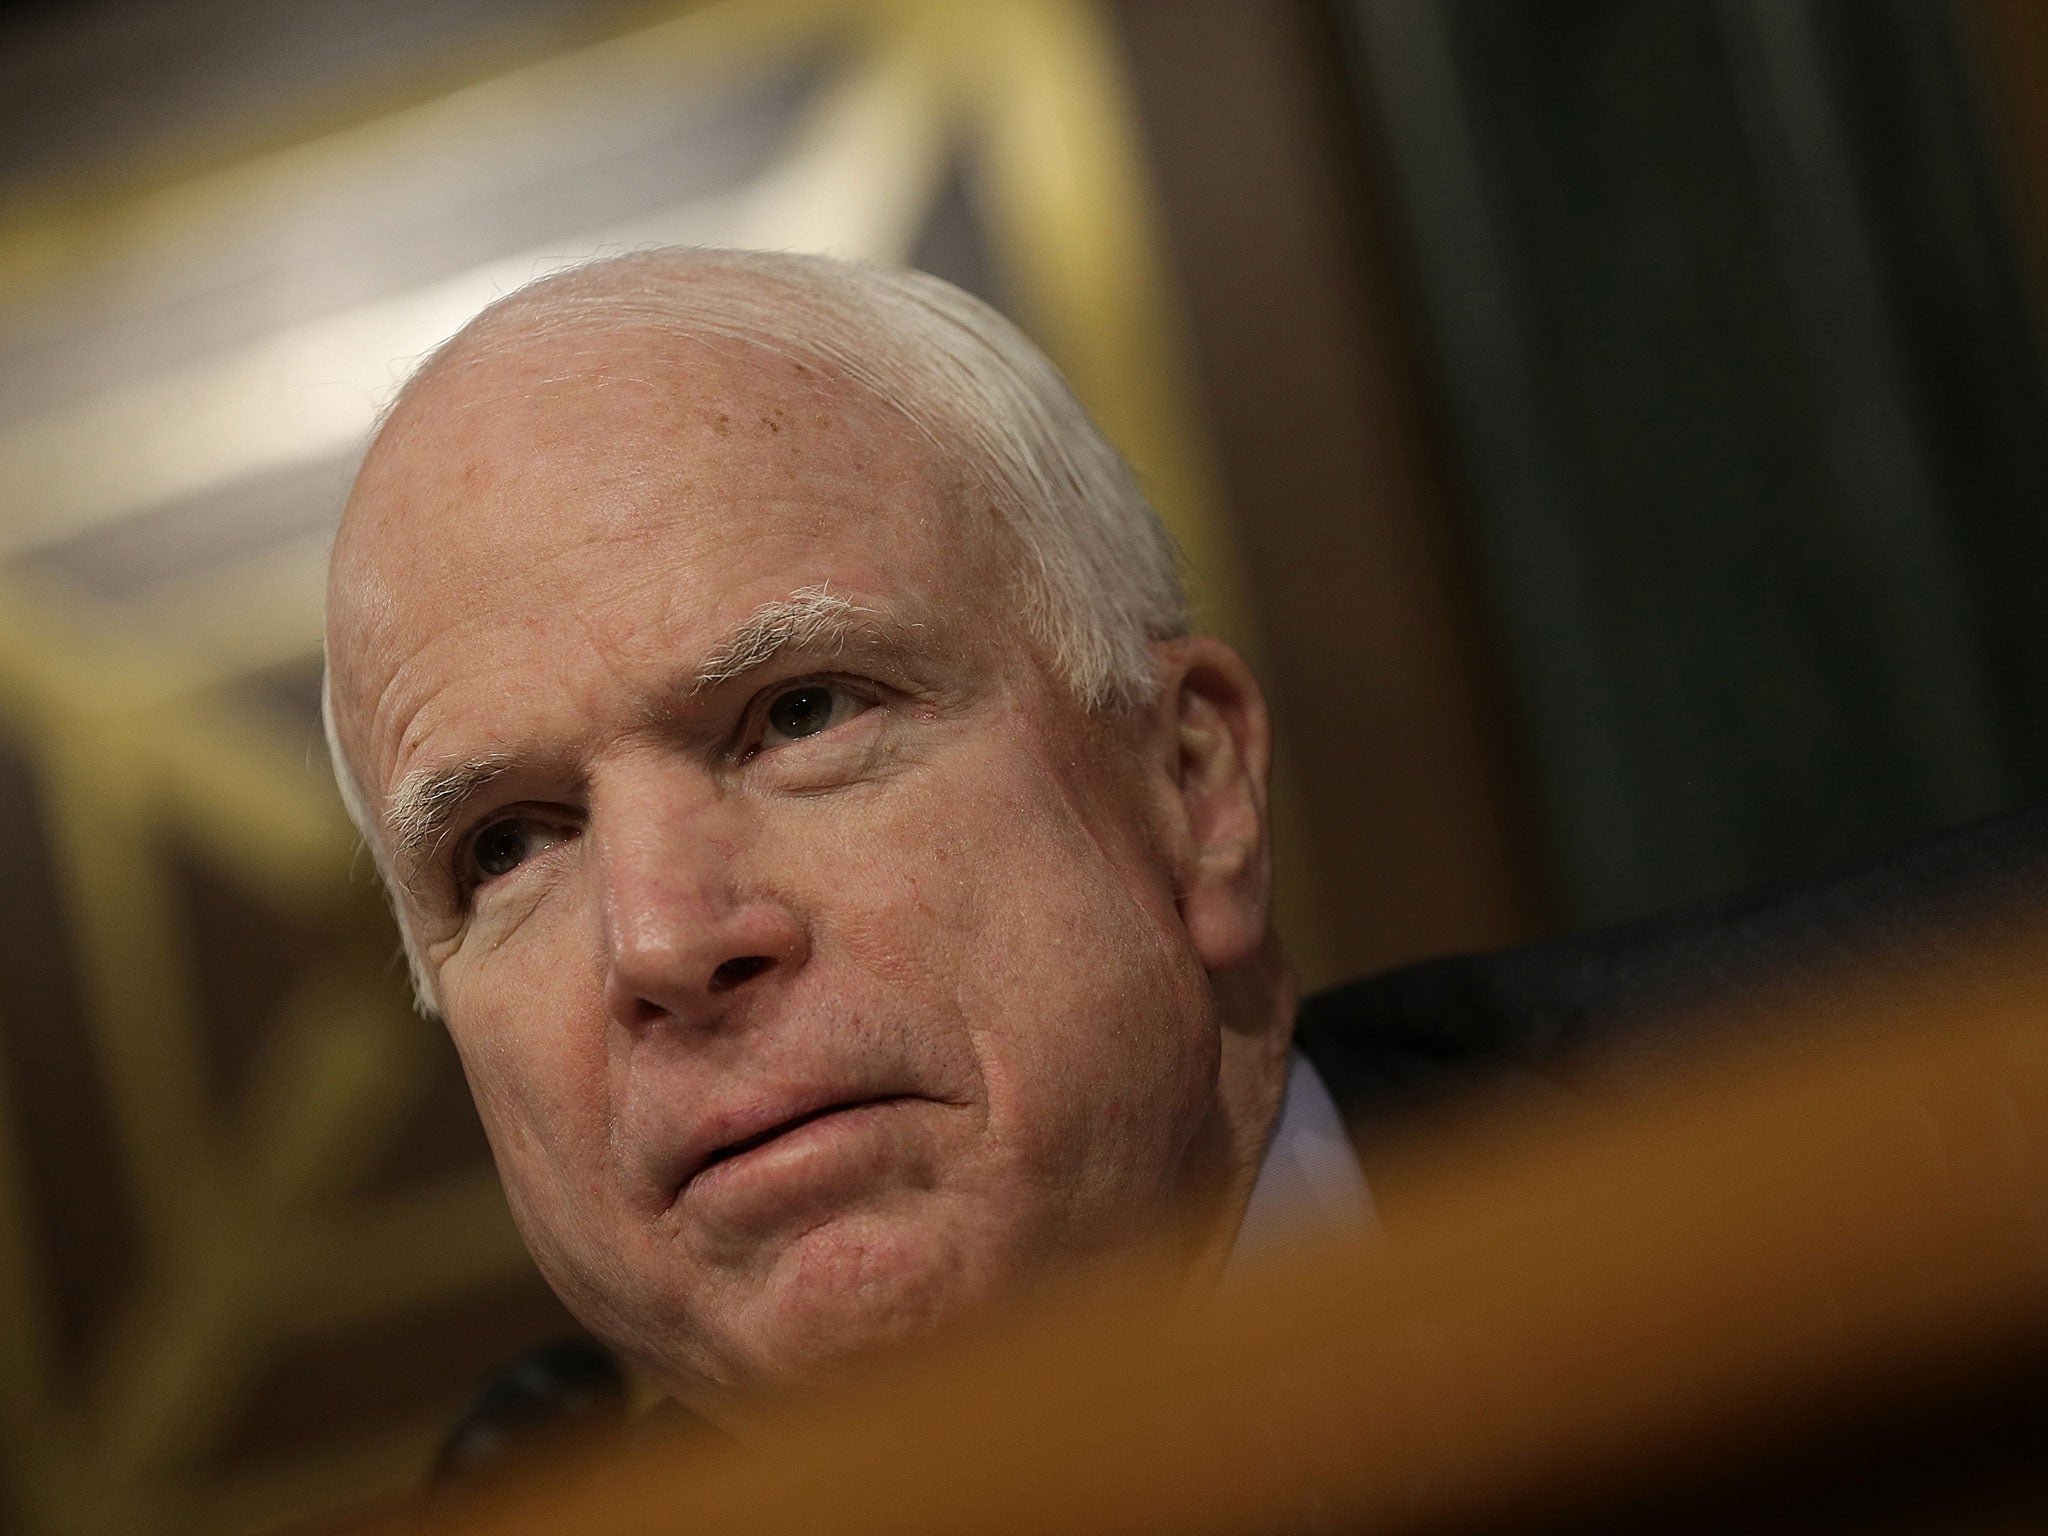 John McCain is facing his toughest re-election in three decades as a US Senator (Getty Images)